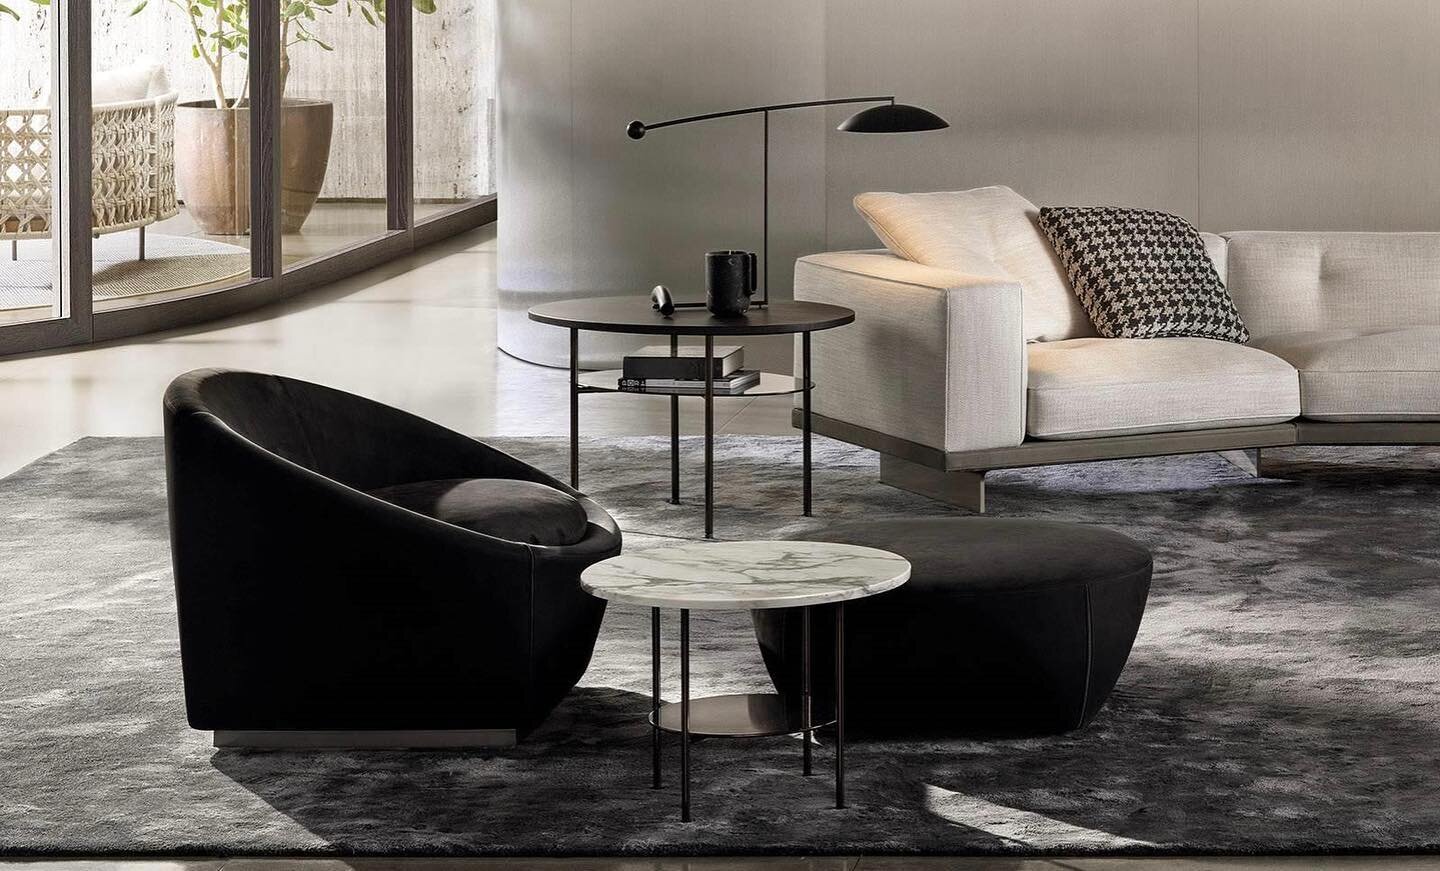 This iconic chair combines comfort and style effortlessly, offering a harmonious blend of form and function.

Browse our collection of statement chairs at casaitliaonline.com.

#CapriBaseChair #Minotti #CasaItalia #LuxuriousSeating #ContemporaryElega